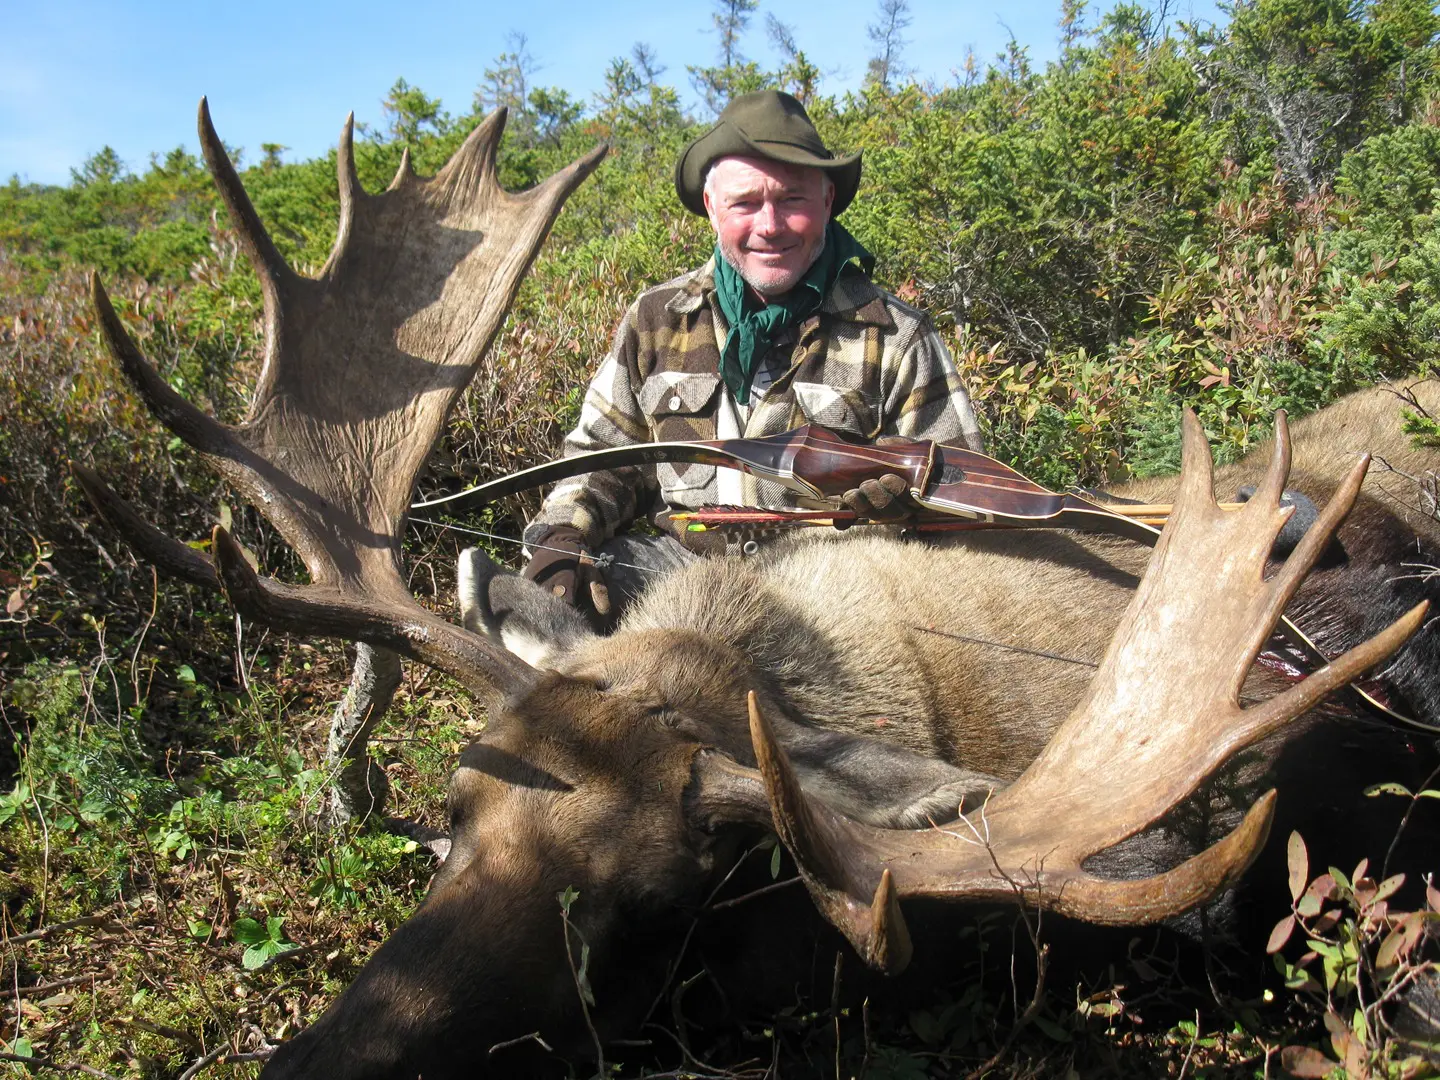 Man holding a bow posing with a hunted moose